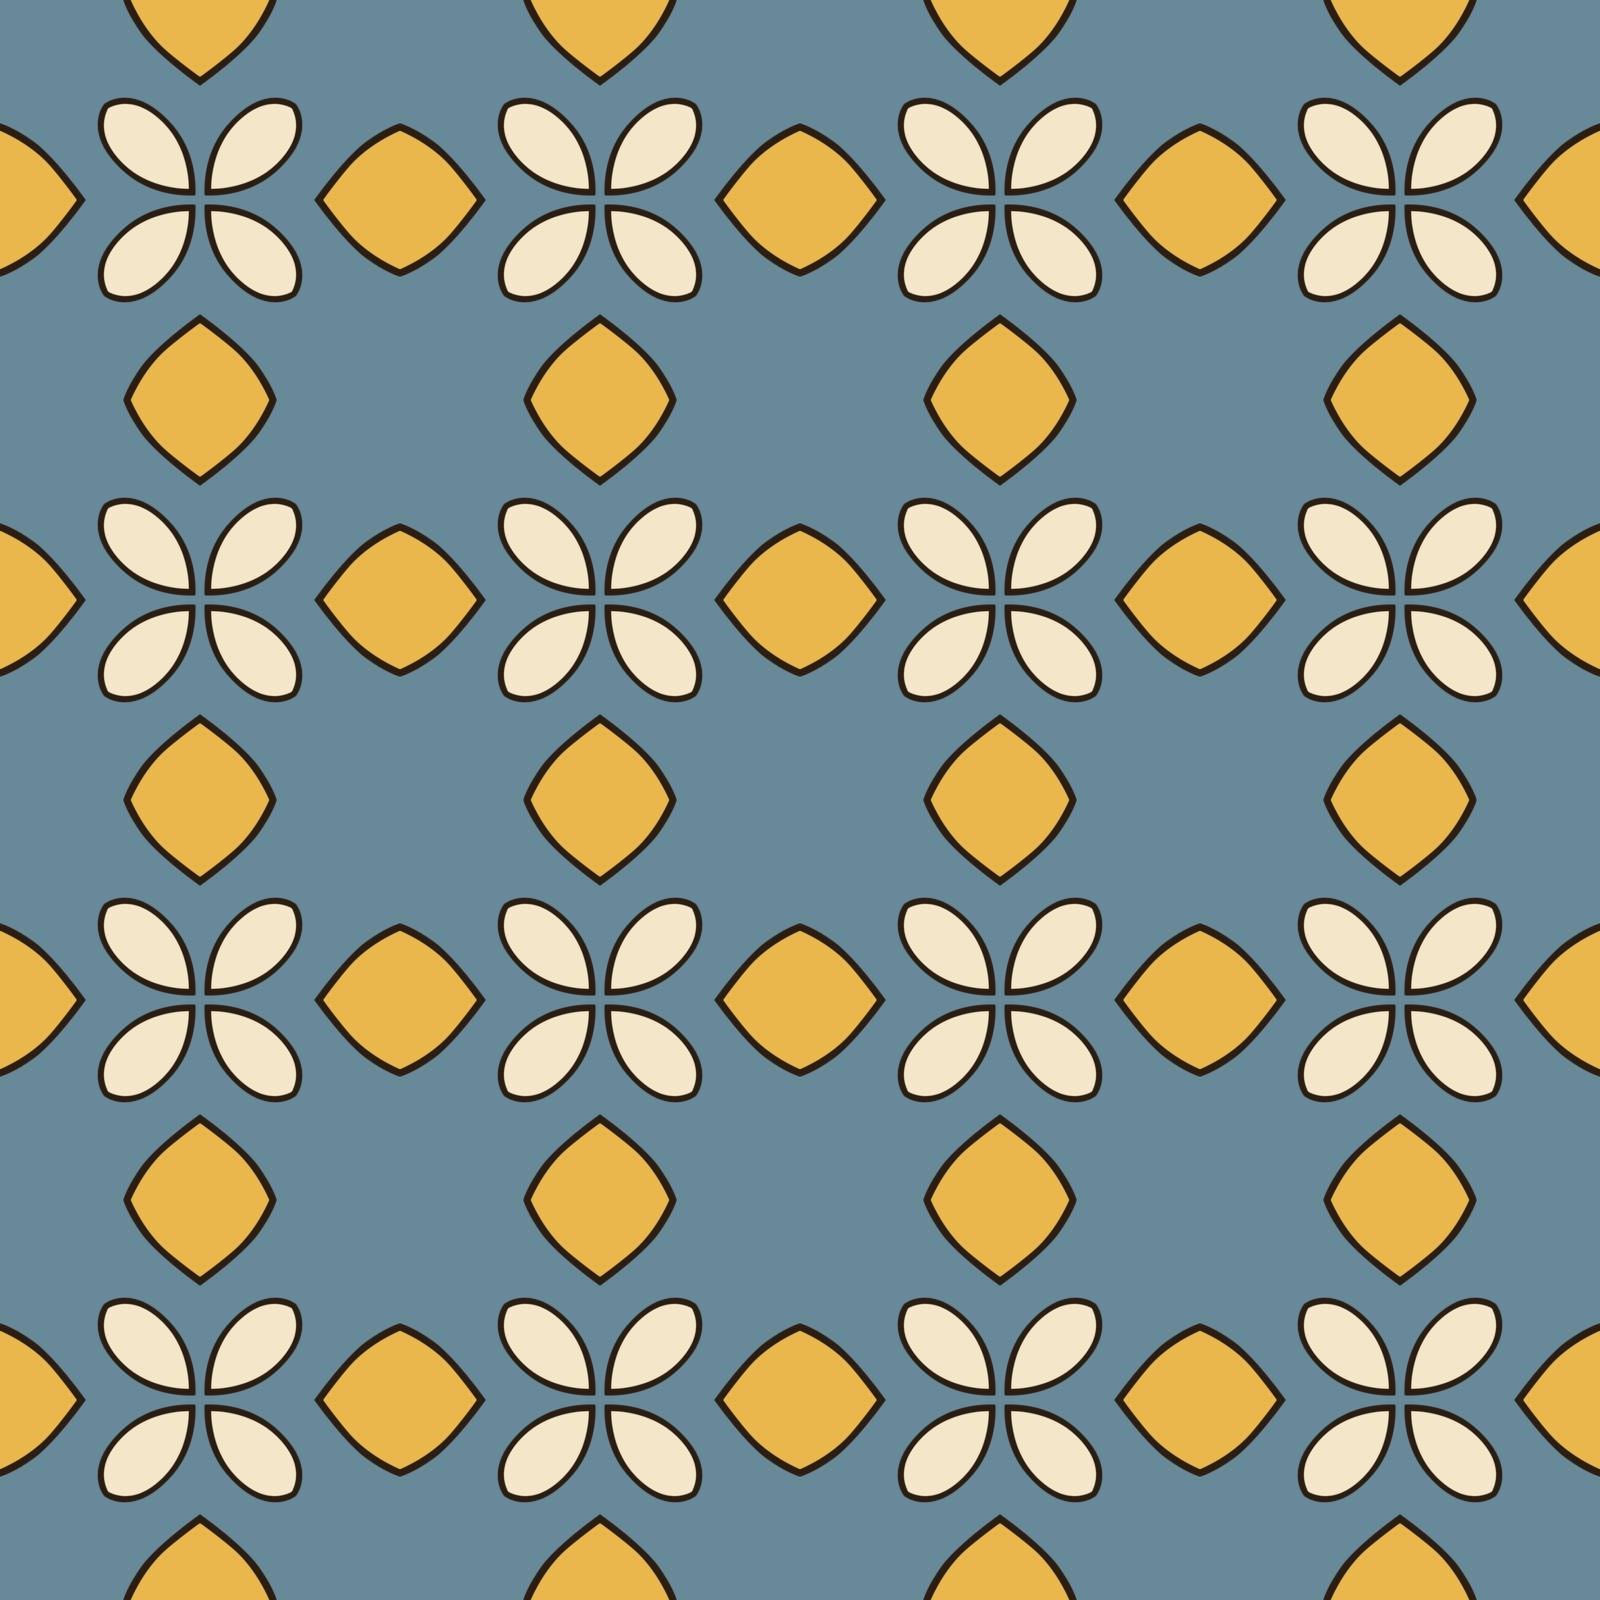 Seamless illustrated pattern made of abstract elements in beige, blue, yellow and black